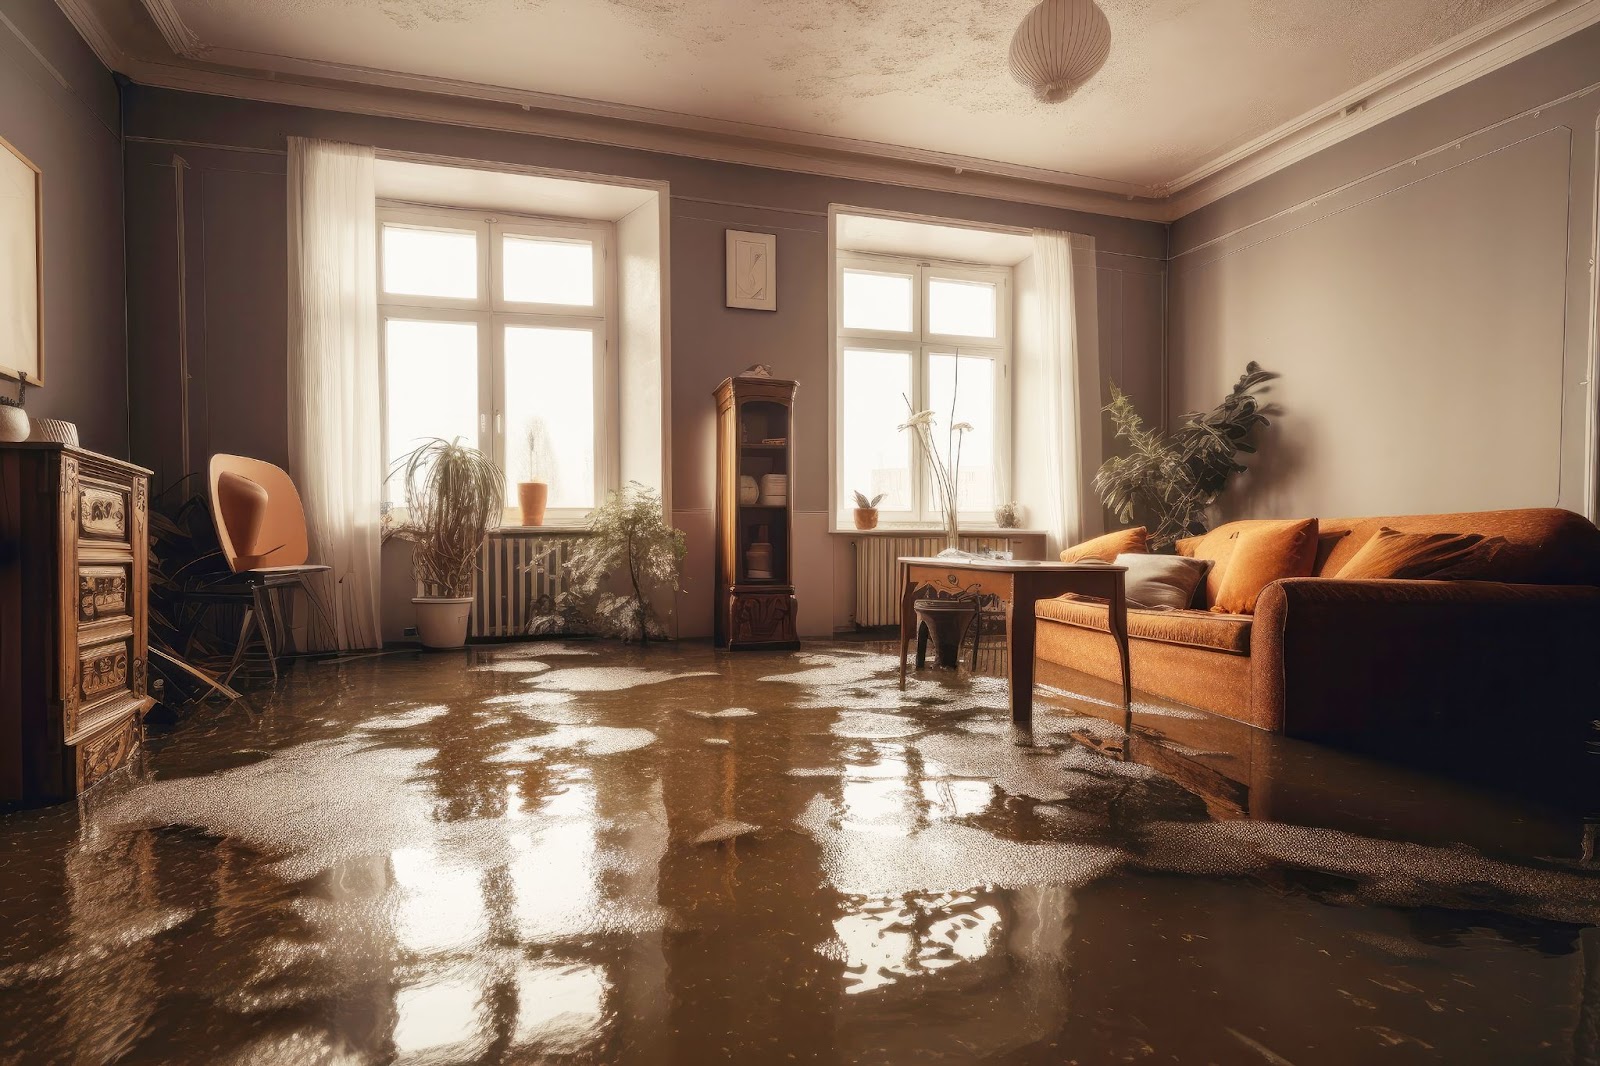 A flooded room with furniture including a couch.